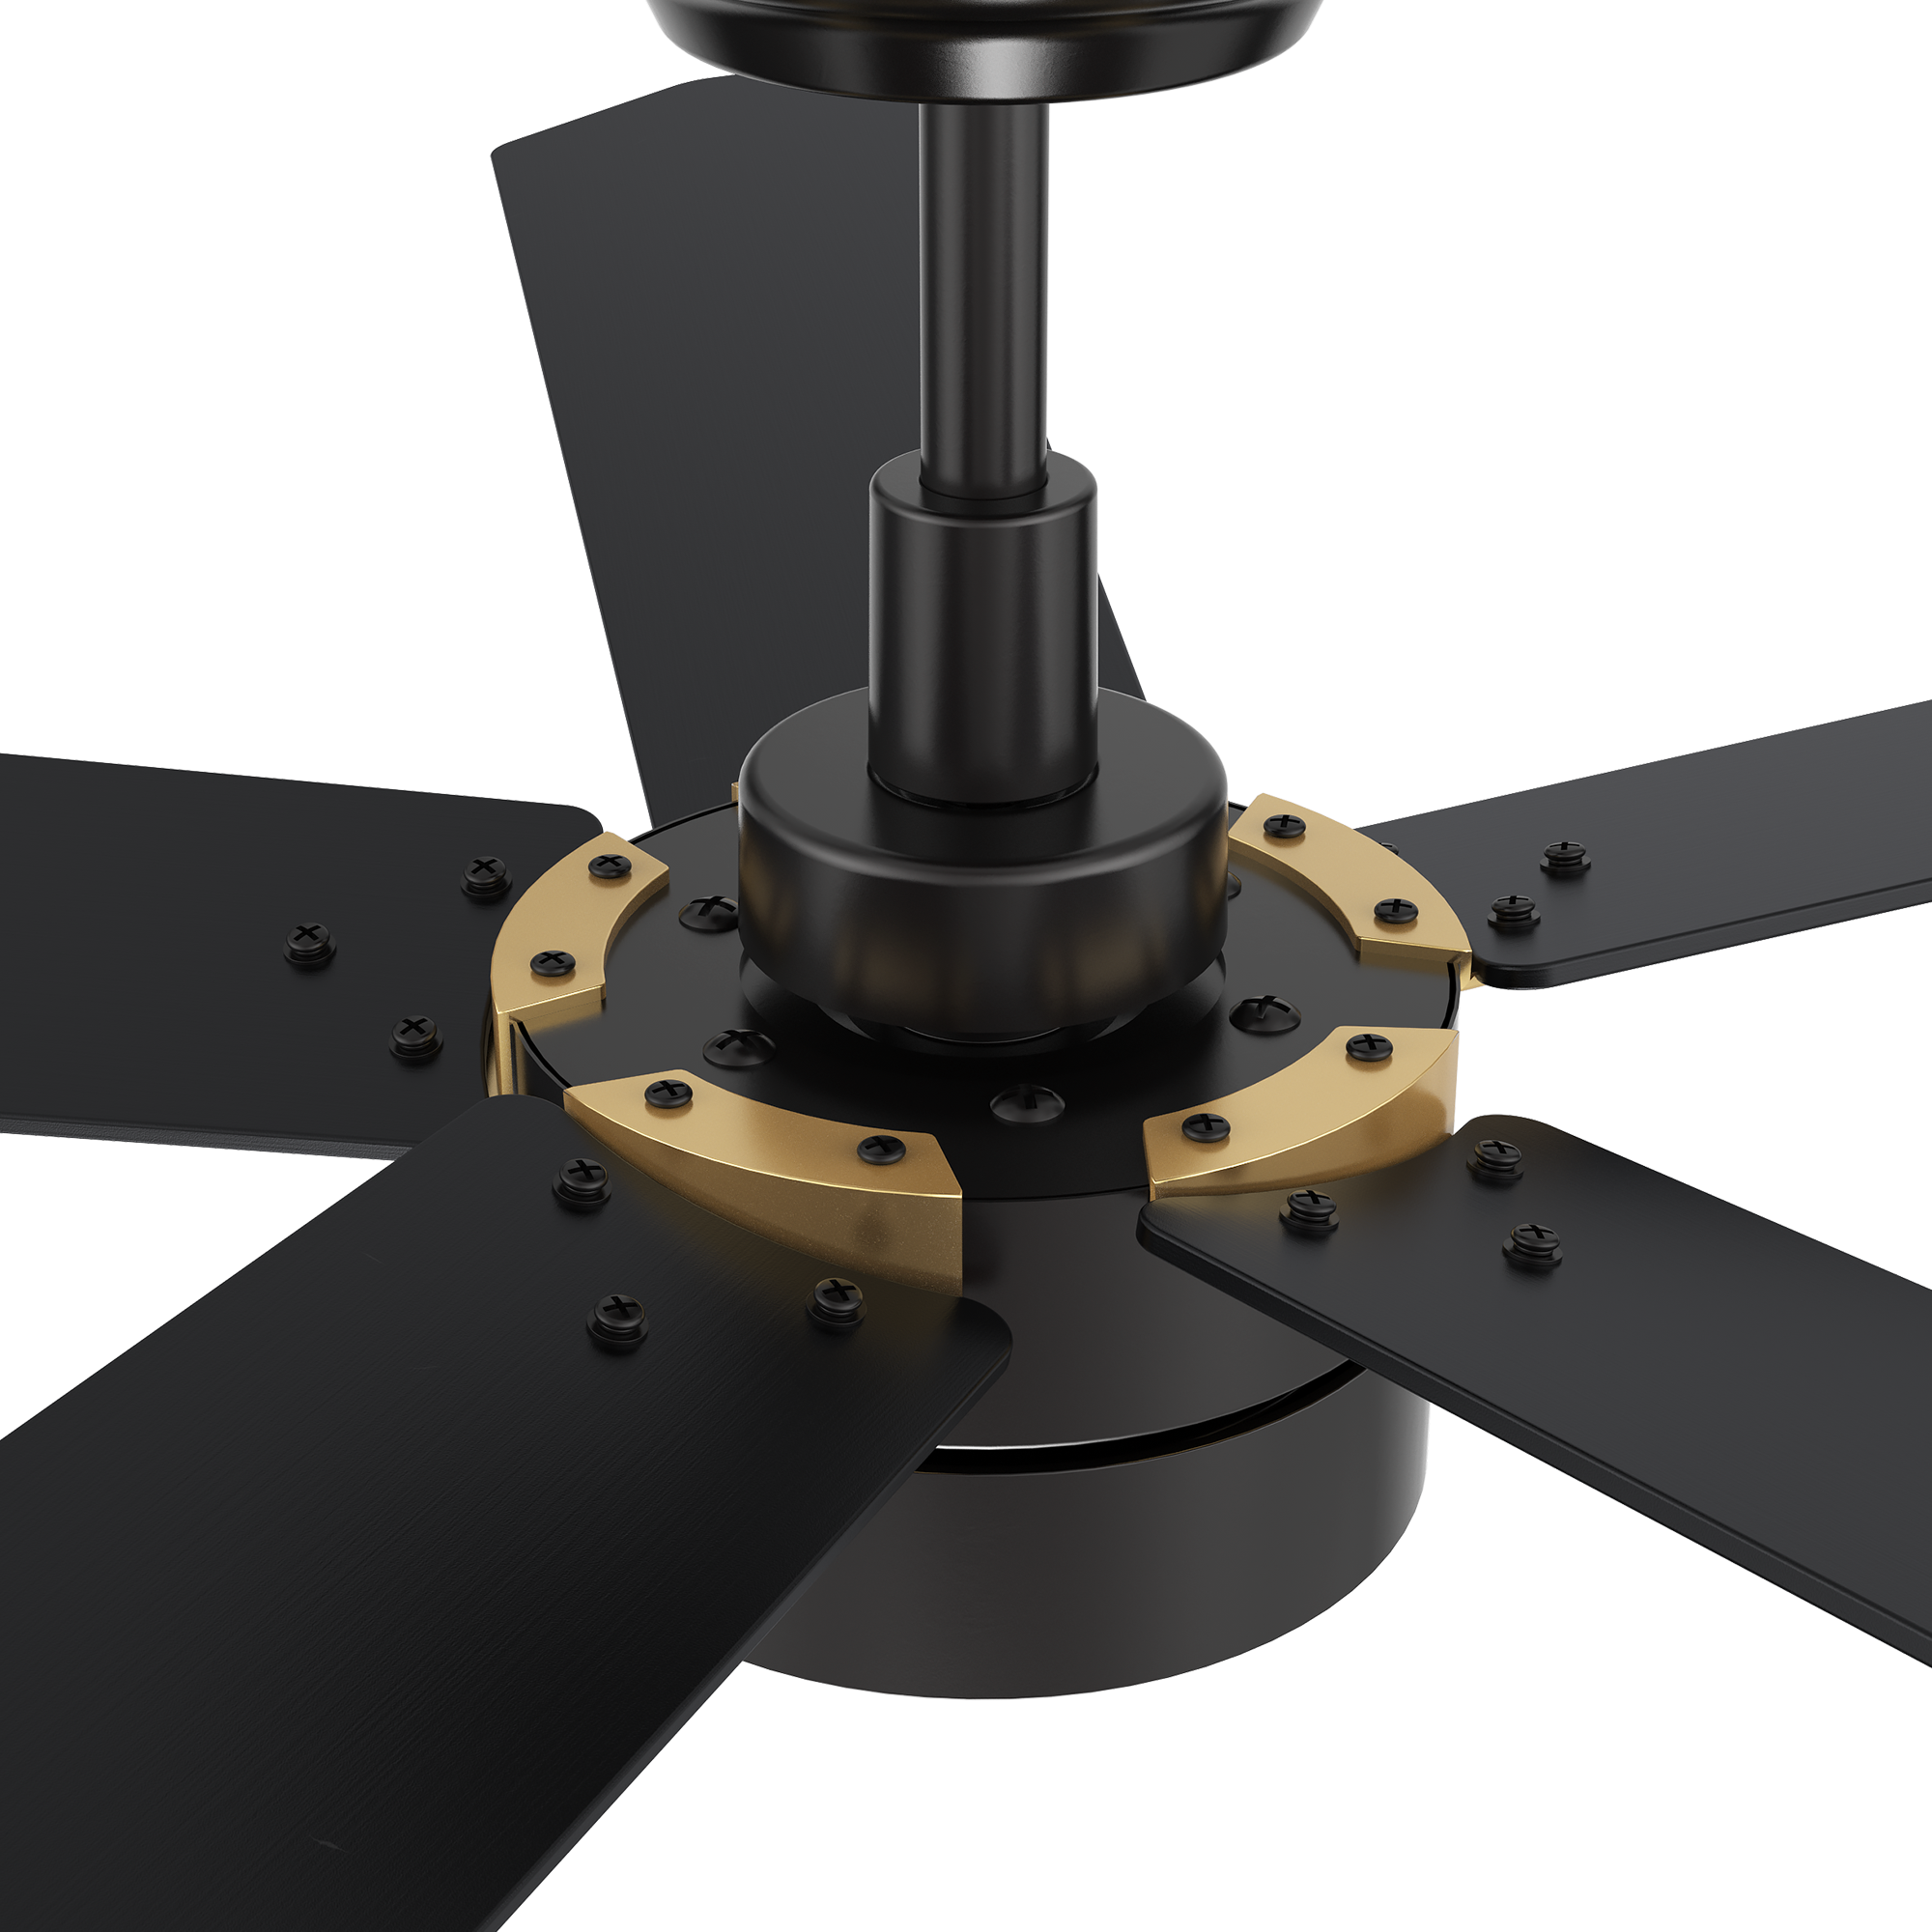 This Granby 52&#39;&#39; smart ceiling fan are made with incredibly efficient and completely silent DC motors, full function remote control - fan speed, light on/off/dim, reverse function, including 10-speed reversible motor allows you to change the direction of your fan from downdraft mode during the summer to updraft mode during the winter.